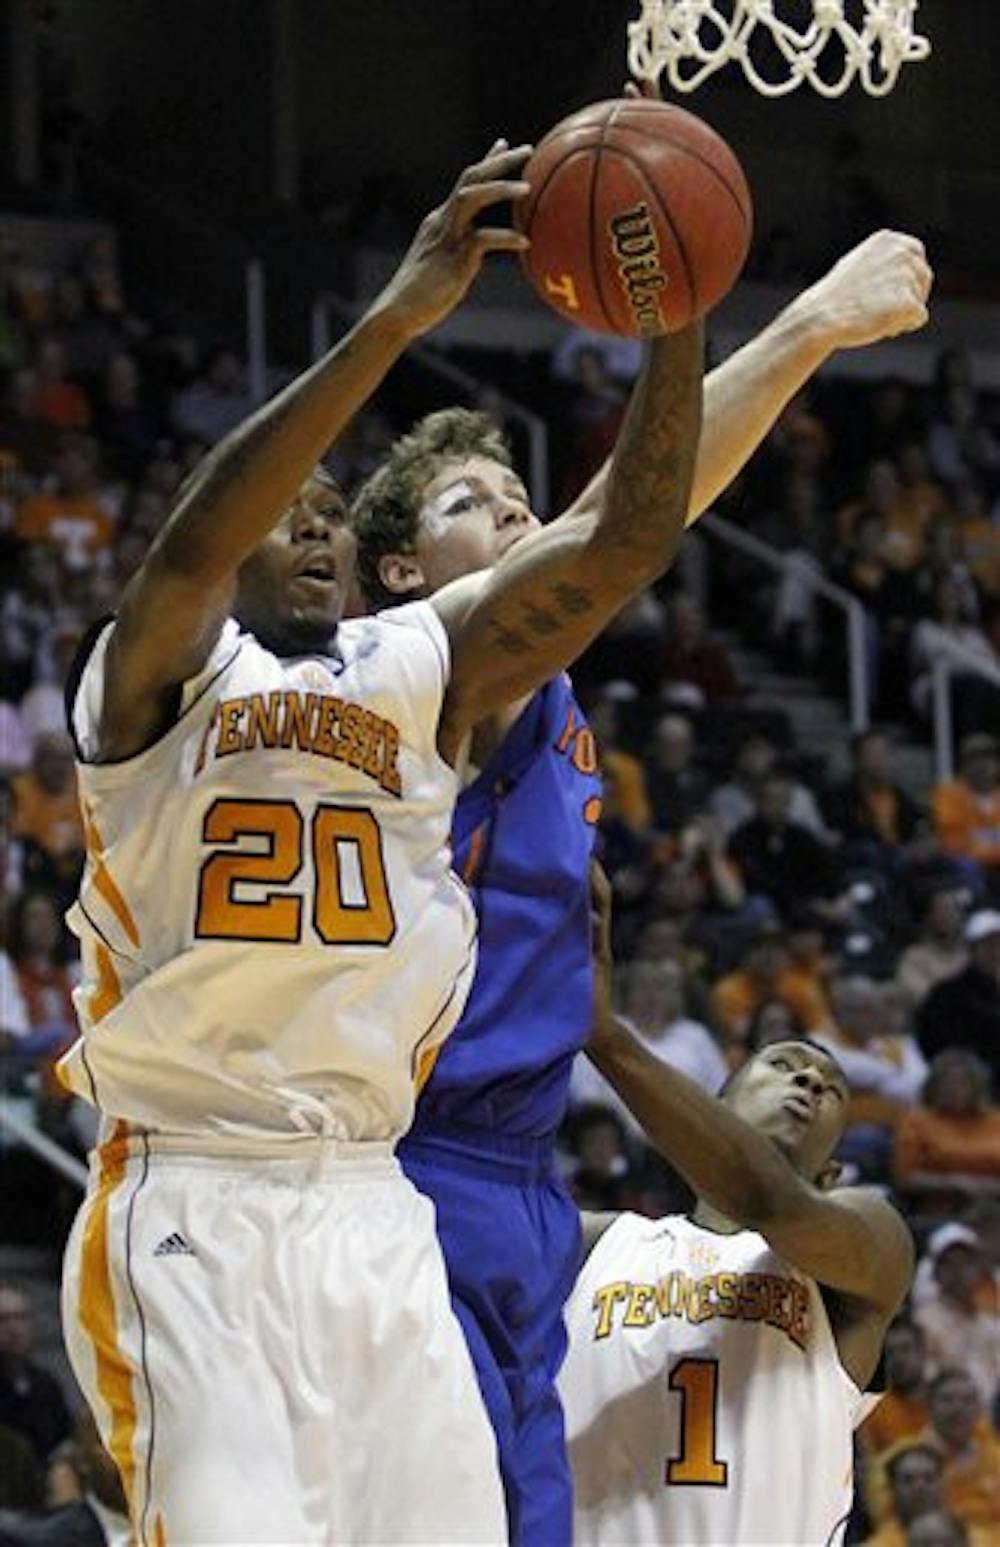 <p>Tennessee's Kenny Hall (20) grabs a rebound away from Florida's Erik Murphy in the first half of an NCAA college basketball game on Saturday, Jan. 7, 2012, in Knoxville, Tenn. Tennessee won 67-56. (AP Photo/Wade Payne)</p>